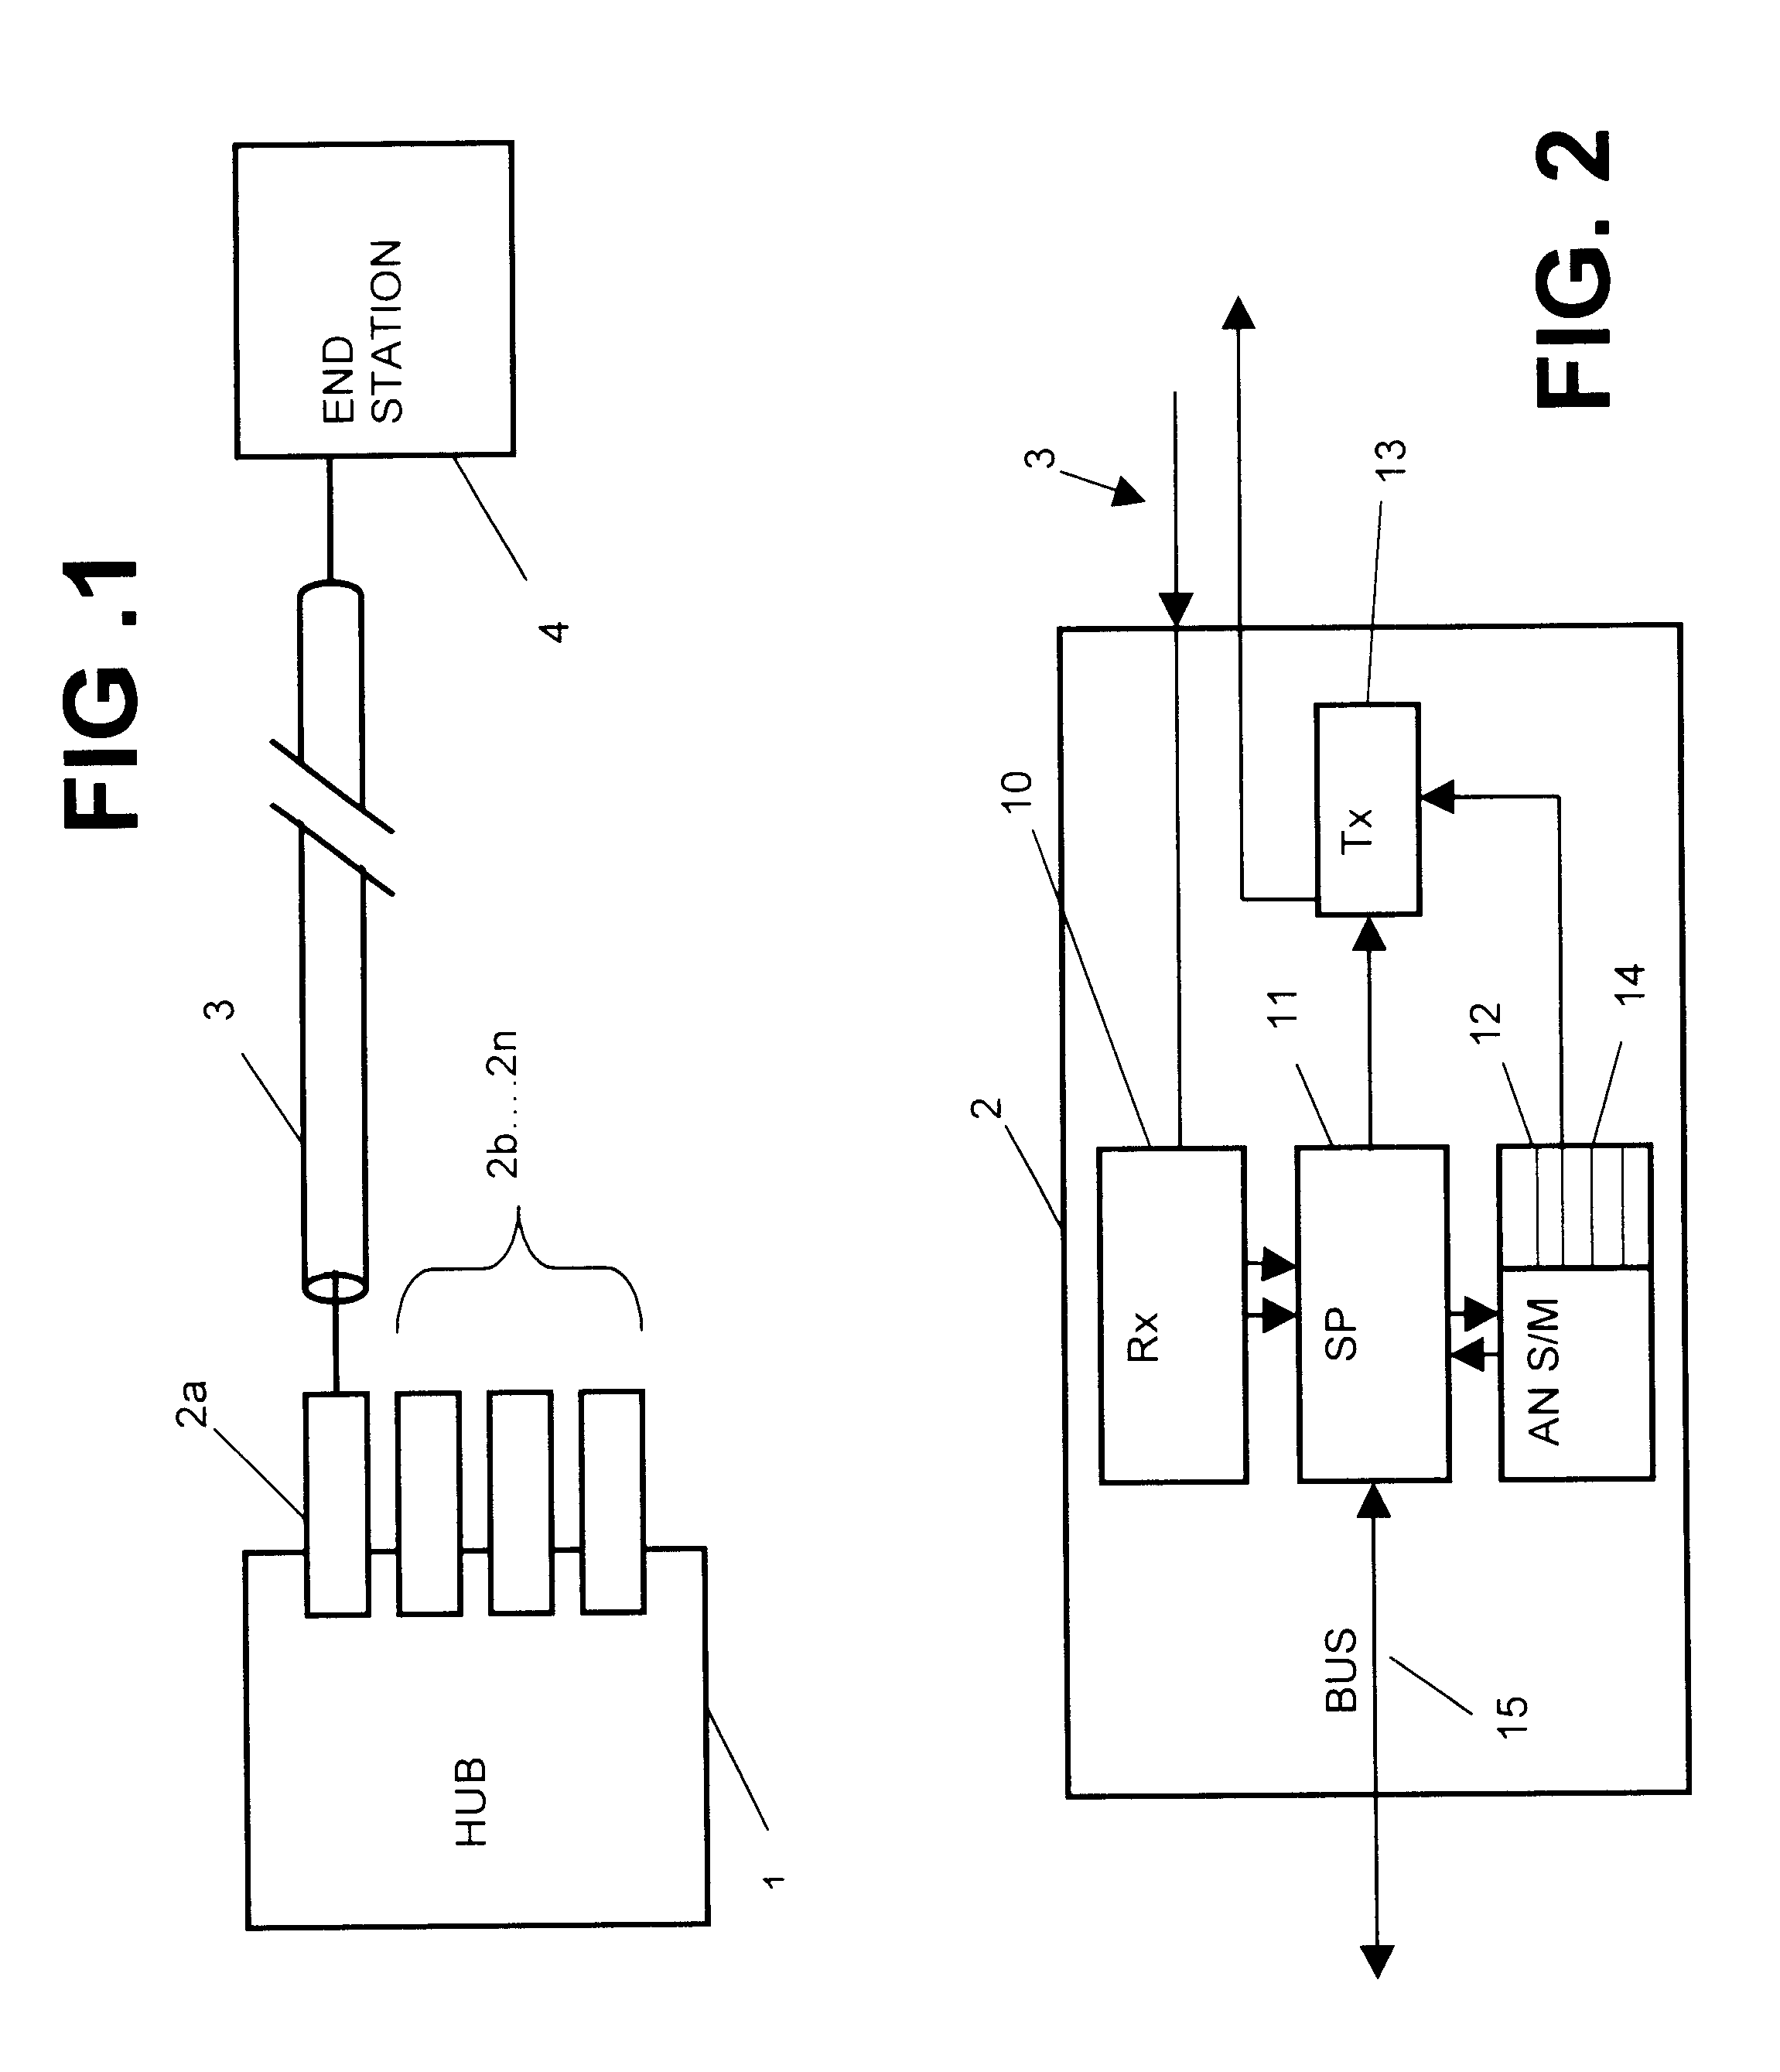 Monitoring of connection between network devices in a packet-based communication system